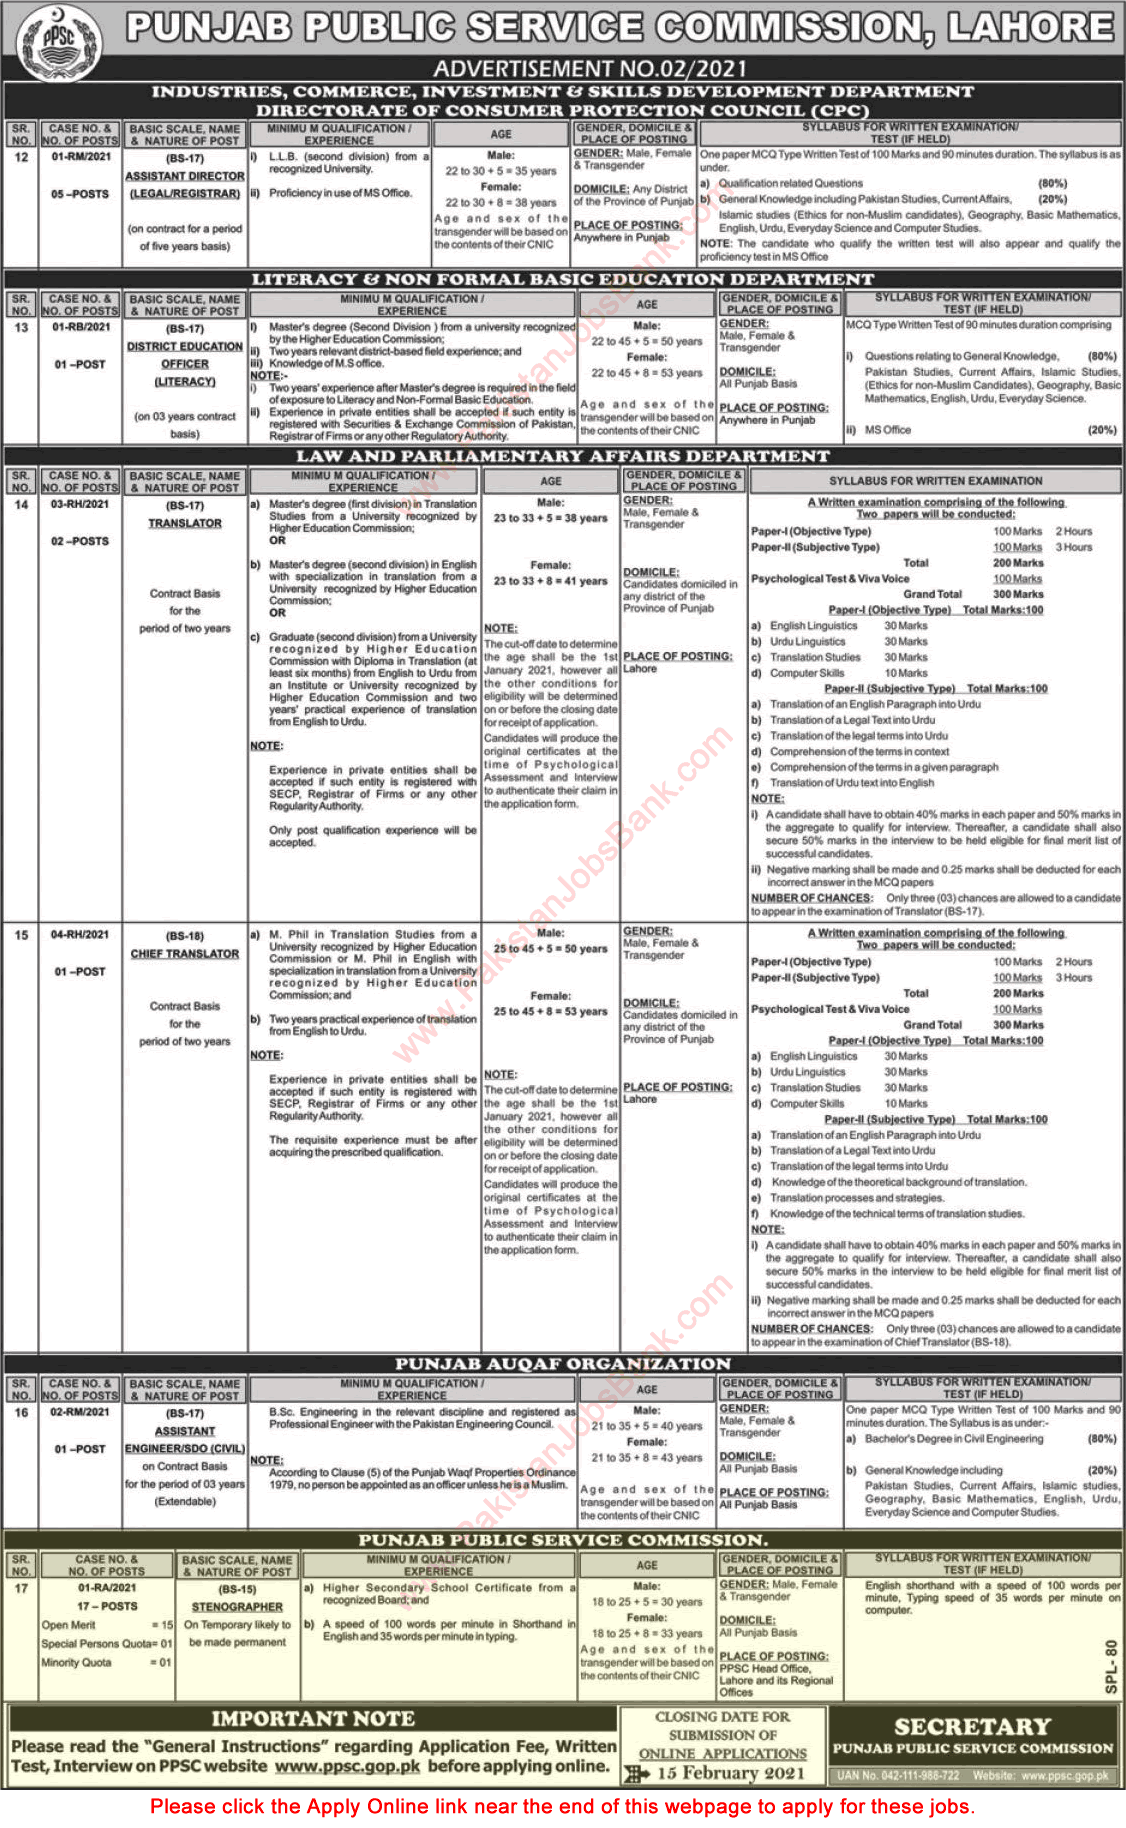 Stenographer Jobs in Punjab Public Service Commission 2021 PPSC Apply Online Latest